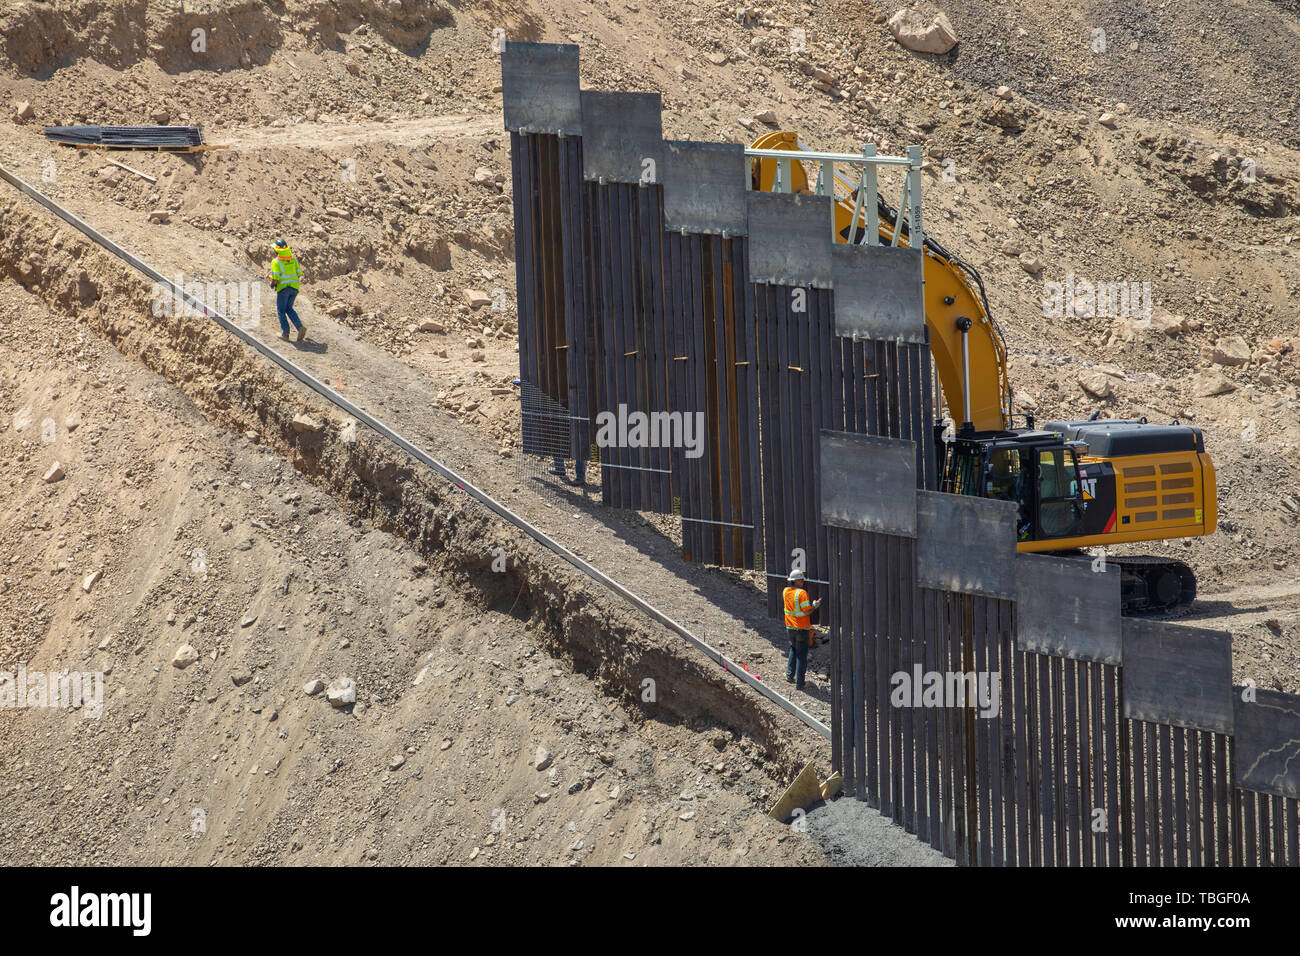 Workers set into place a section of border fence near El Paso, Texas, part of the privately-funded scheme by We Build The Wall, Inc. 30 May 2019 Stock Photo